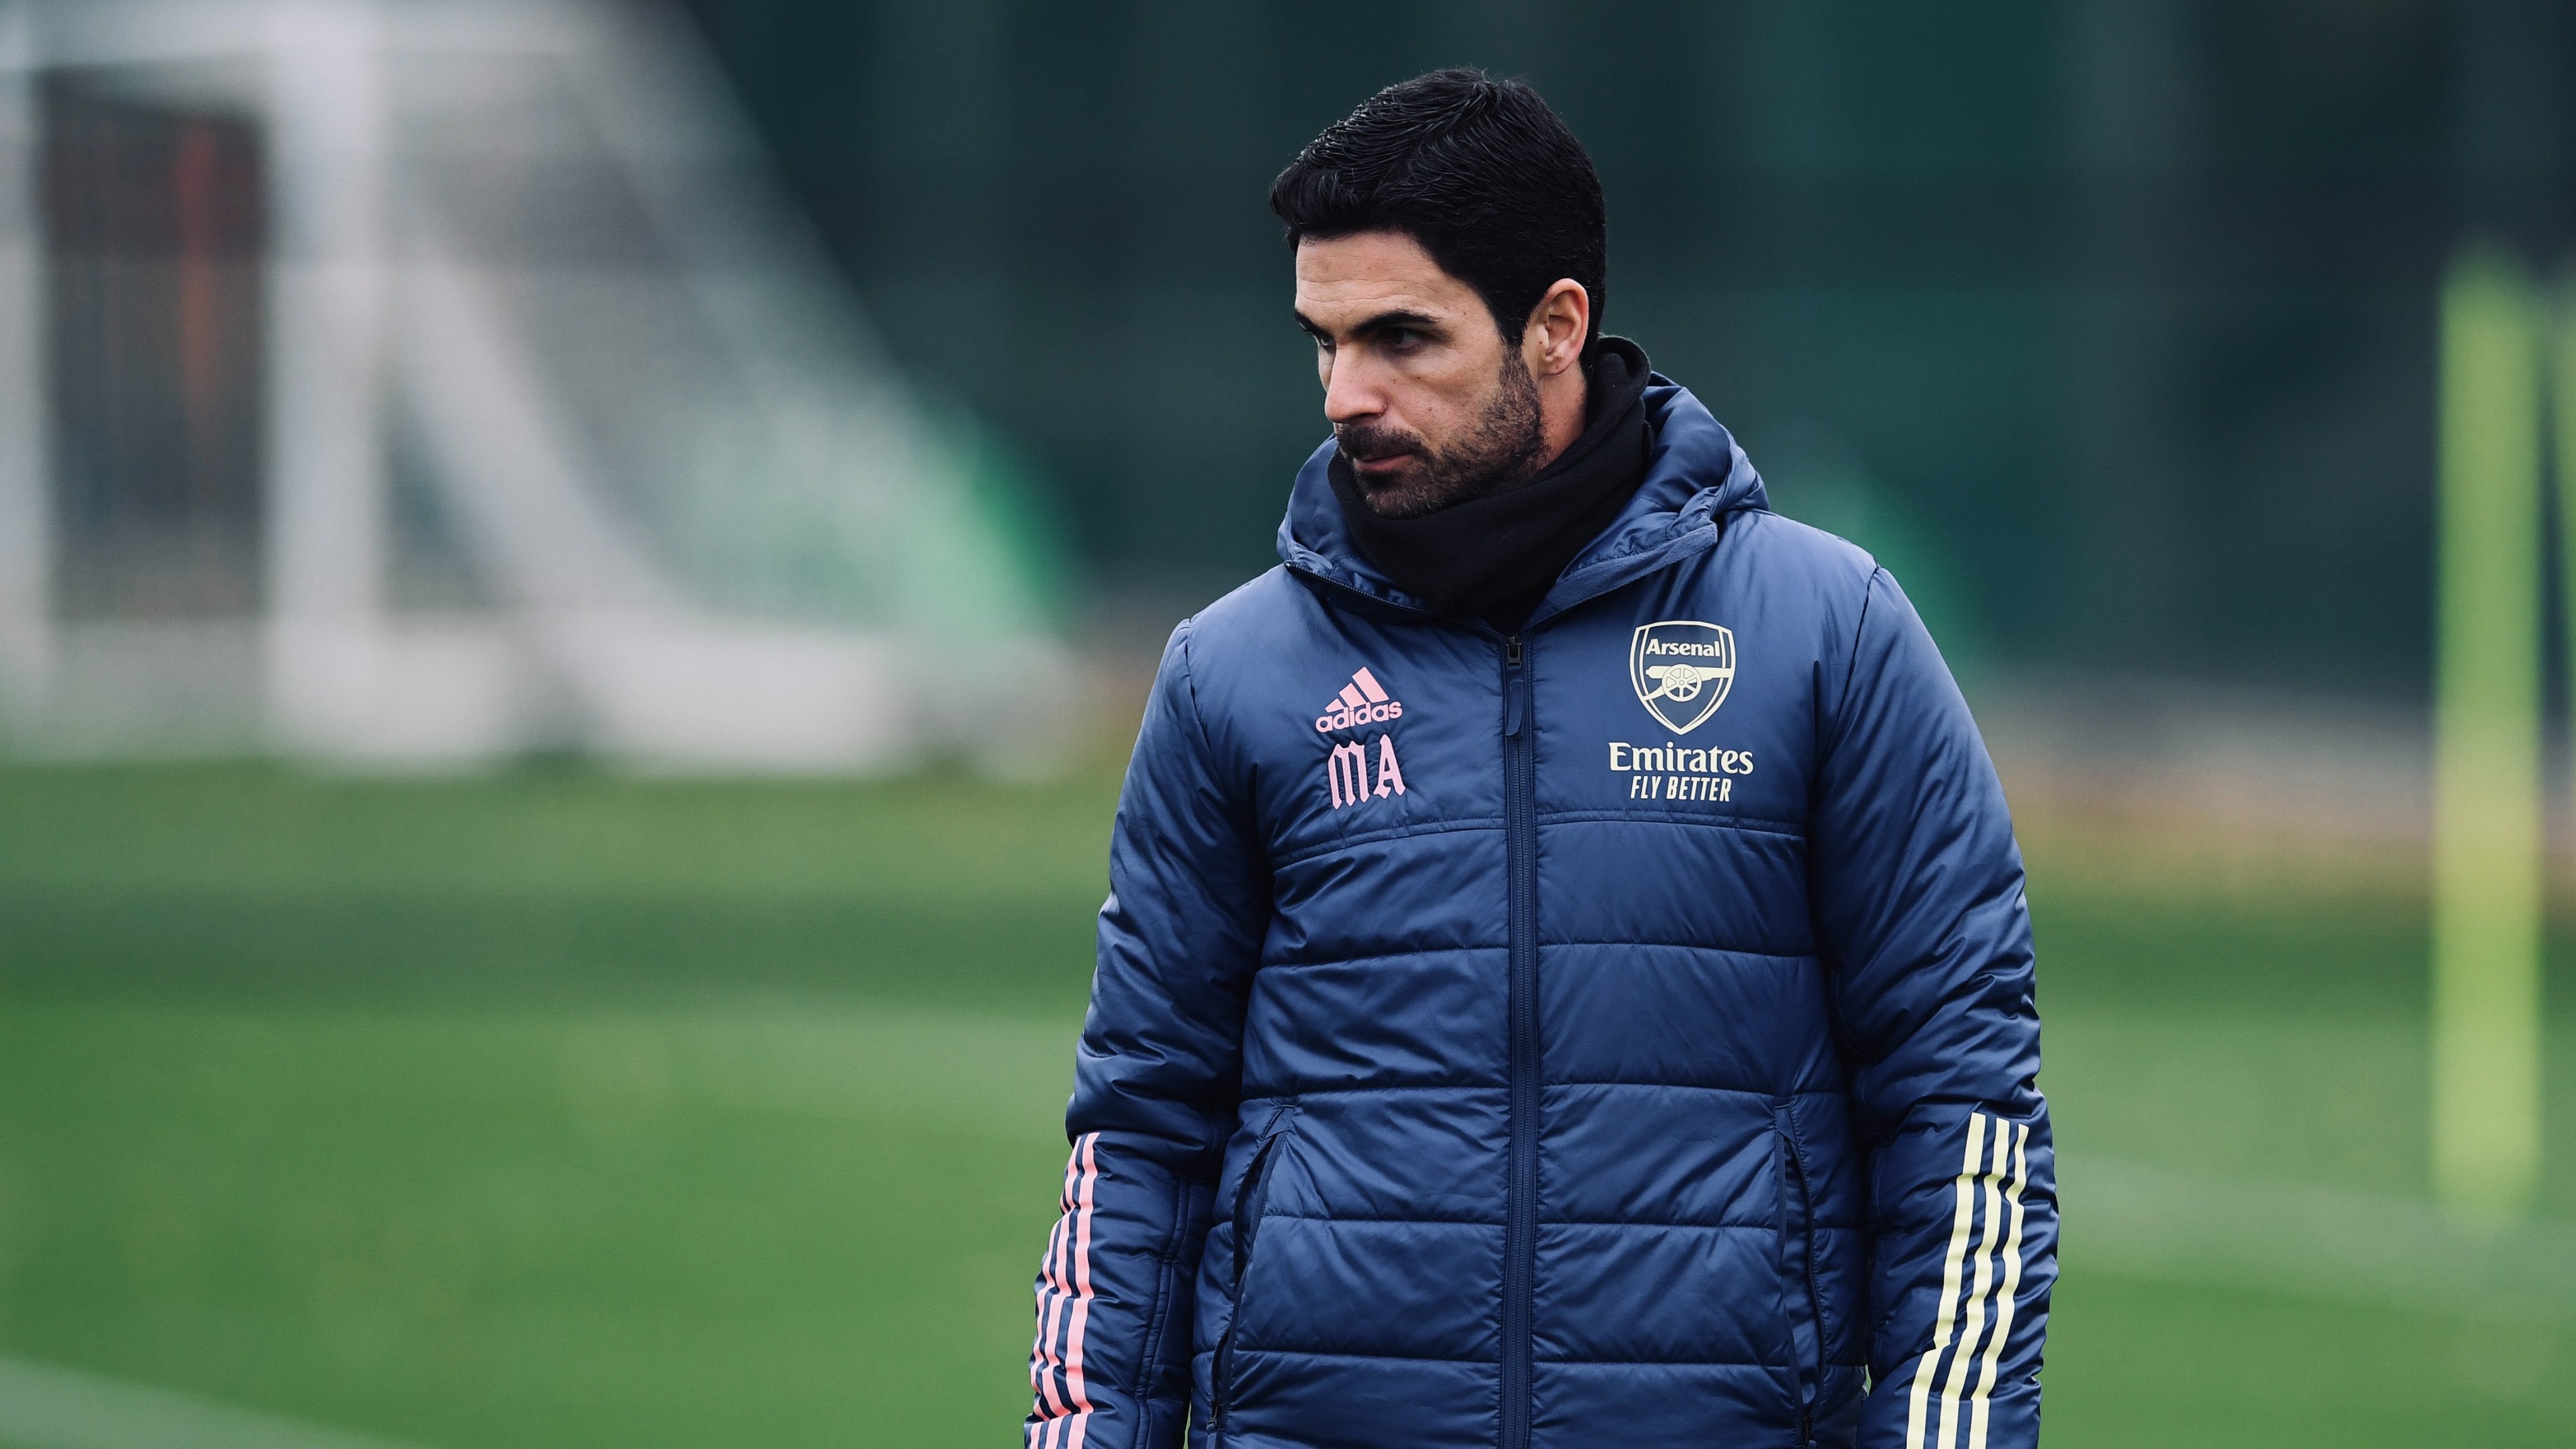 We need to believe in what we’re doing and continue staying strong, claims Mikel Arteta